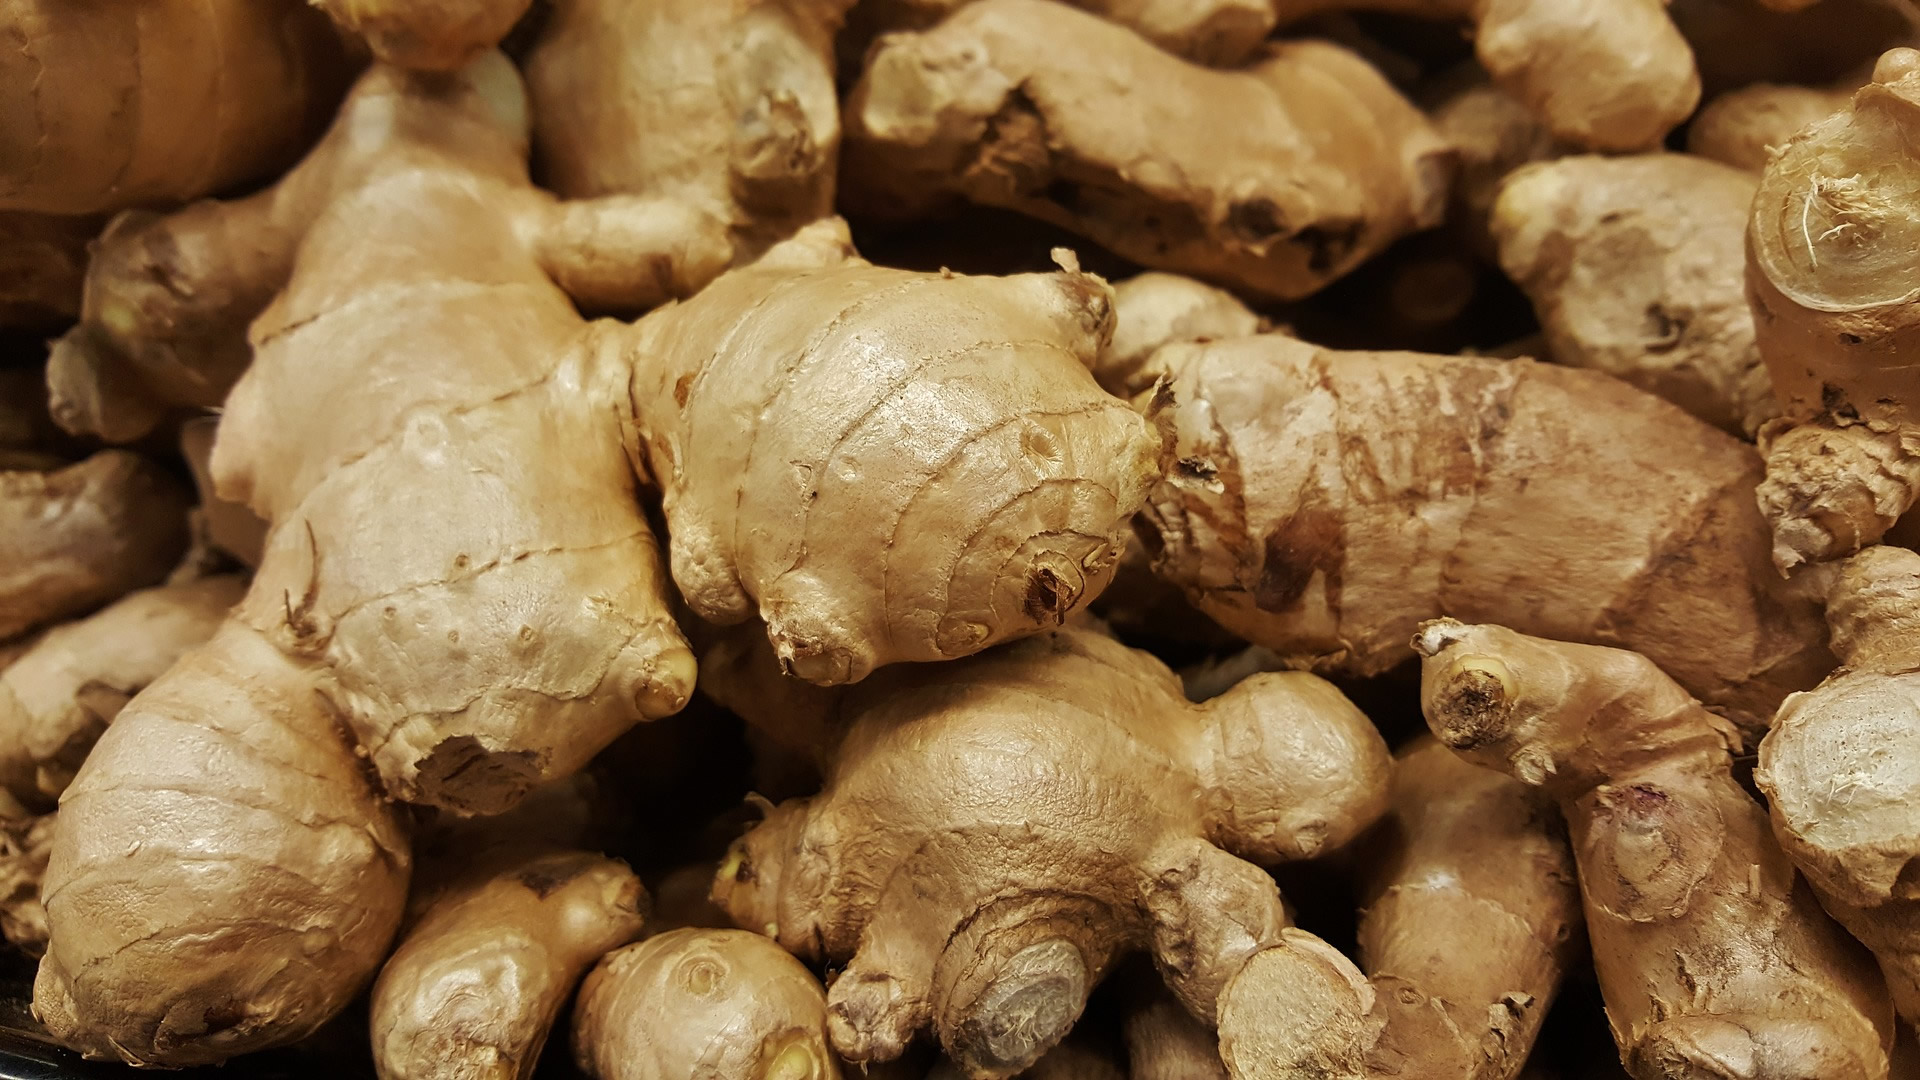 ginger has beneficial effects